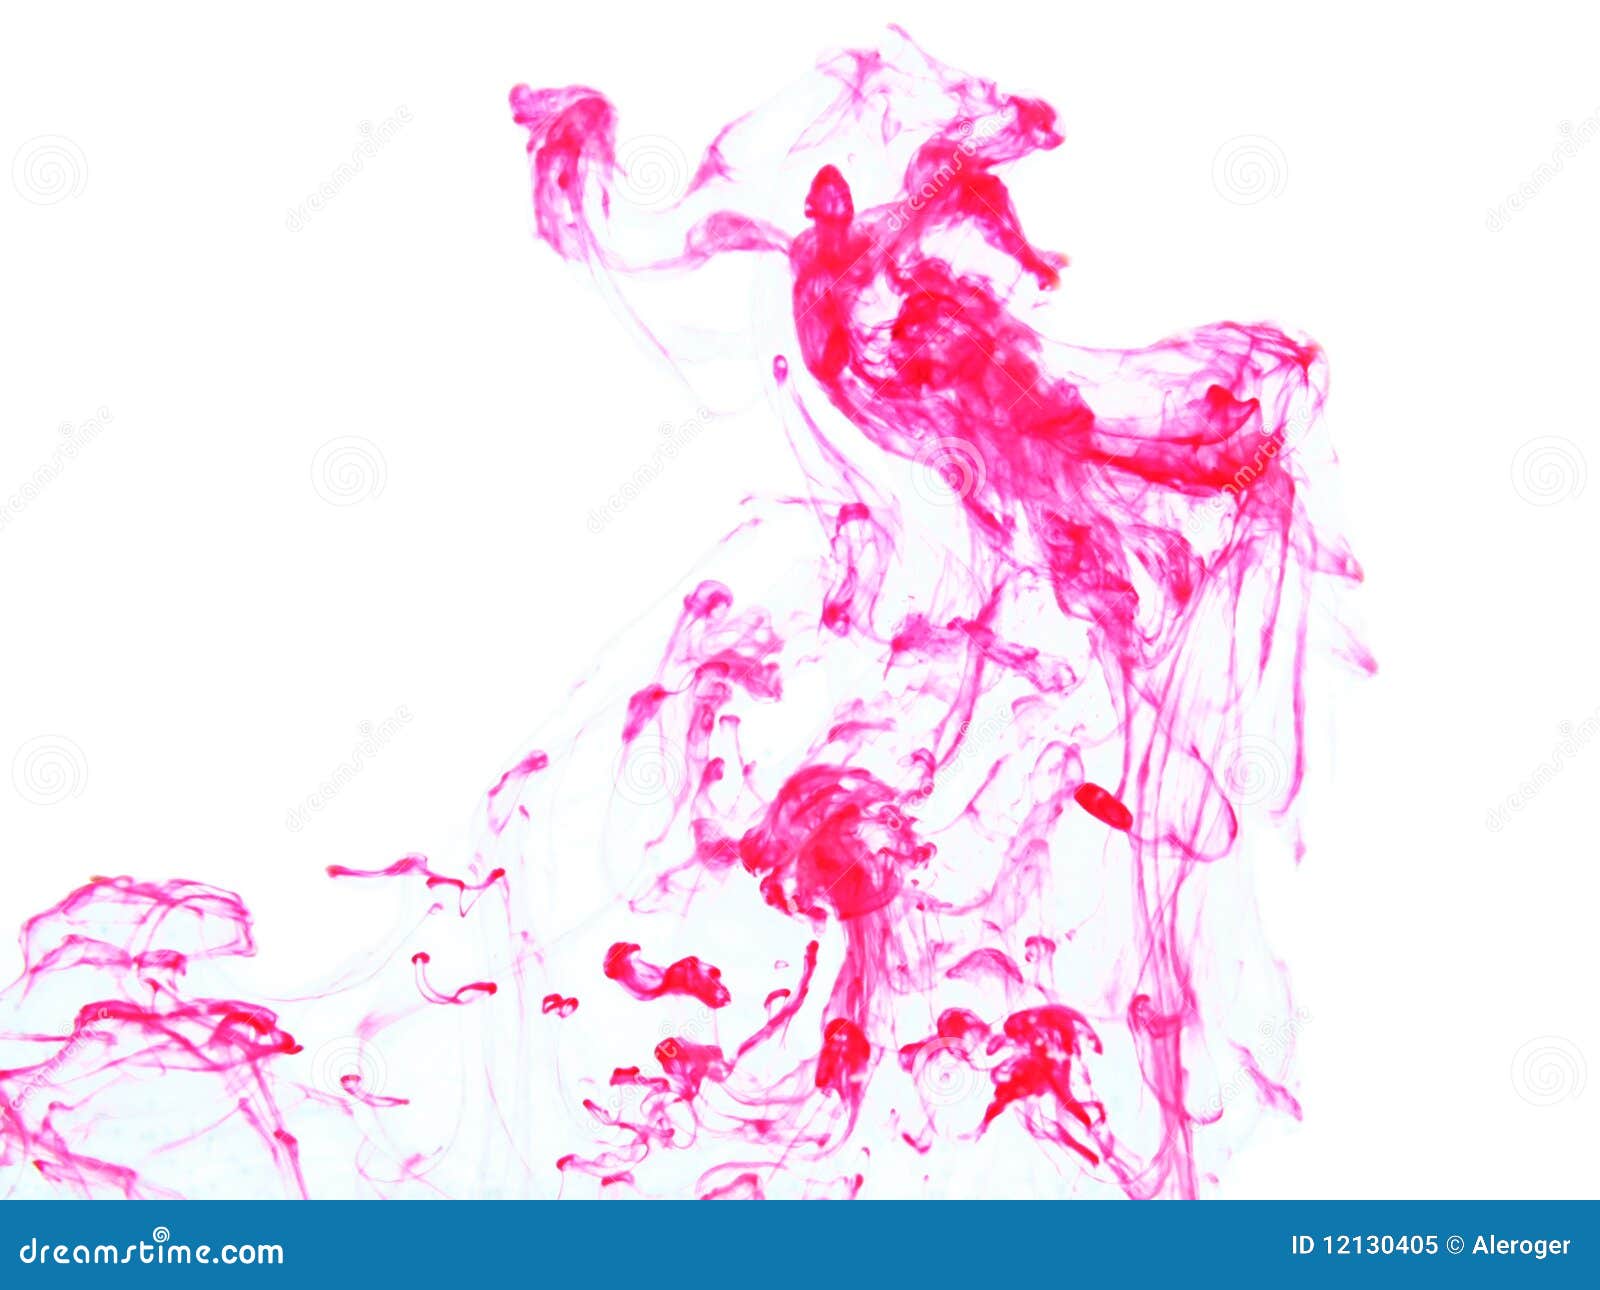 Color water stock image. Image of desktop, lines, forms - 12130405